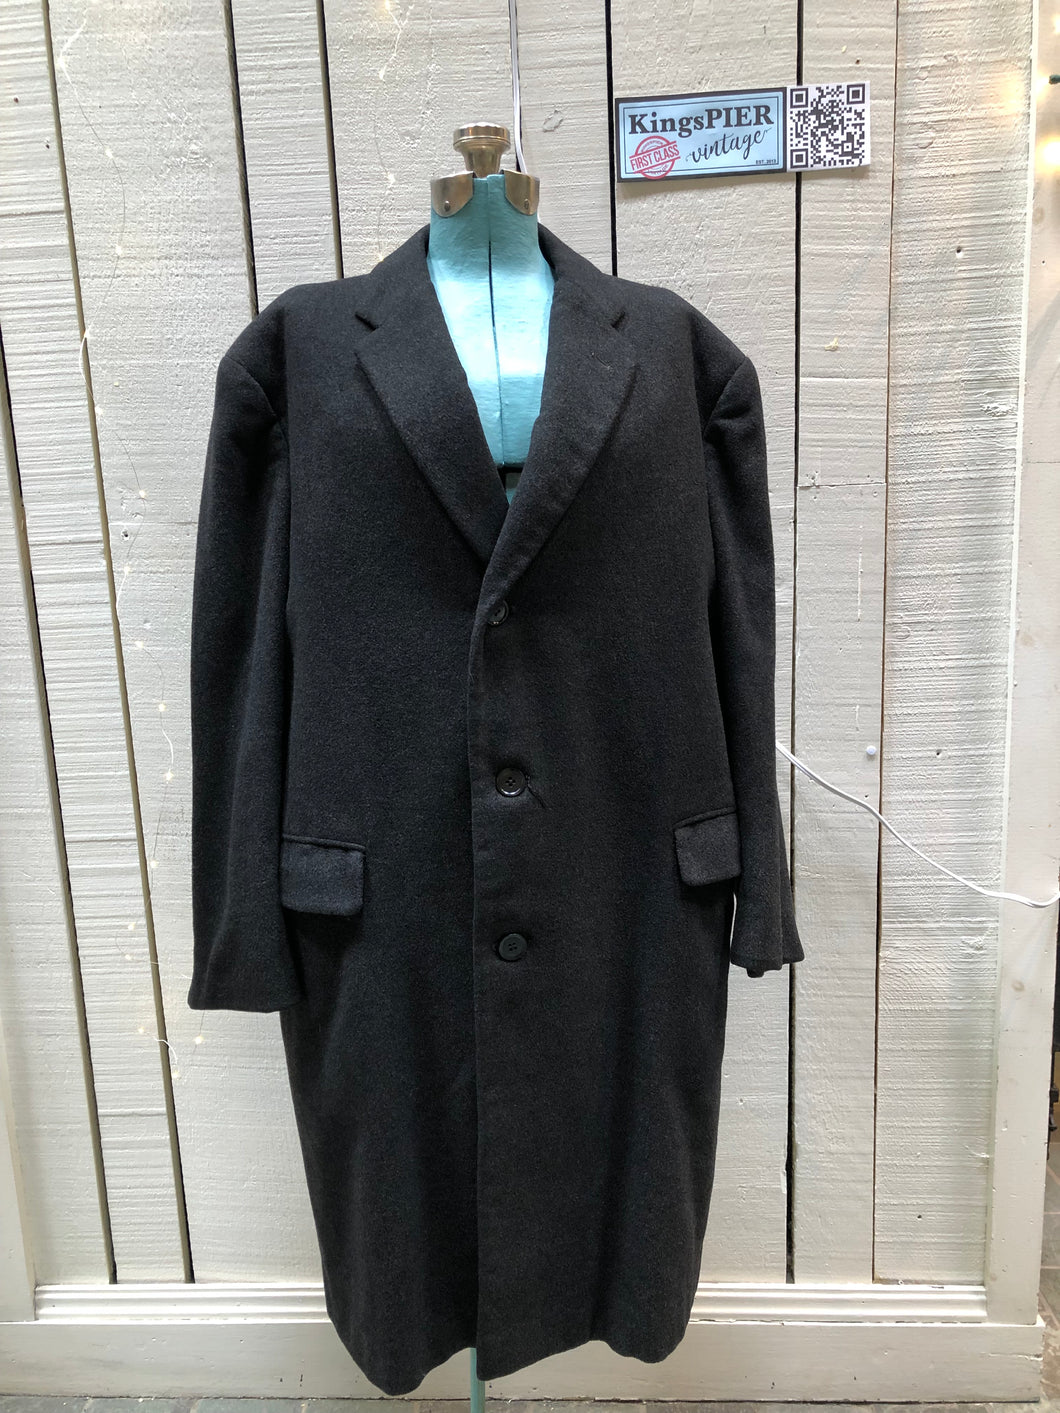 Kingspier Vintage - Vintage 1960s charcoal grey wool overcoat with button closures and flap pockets.